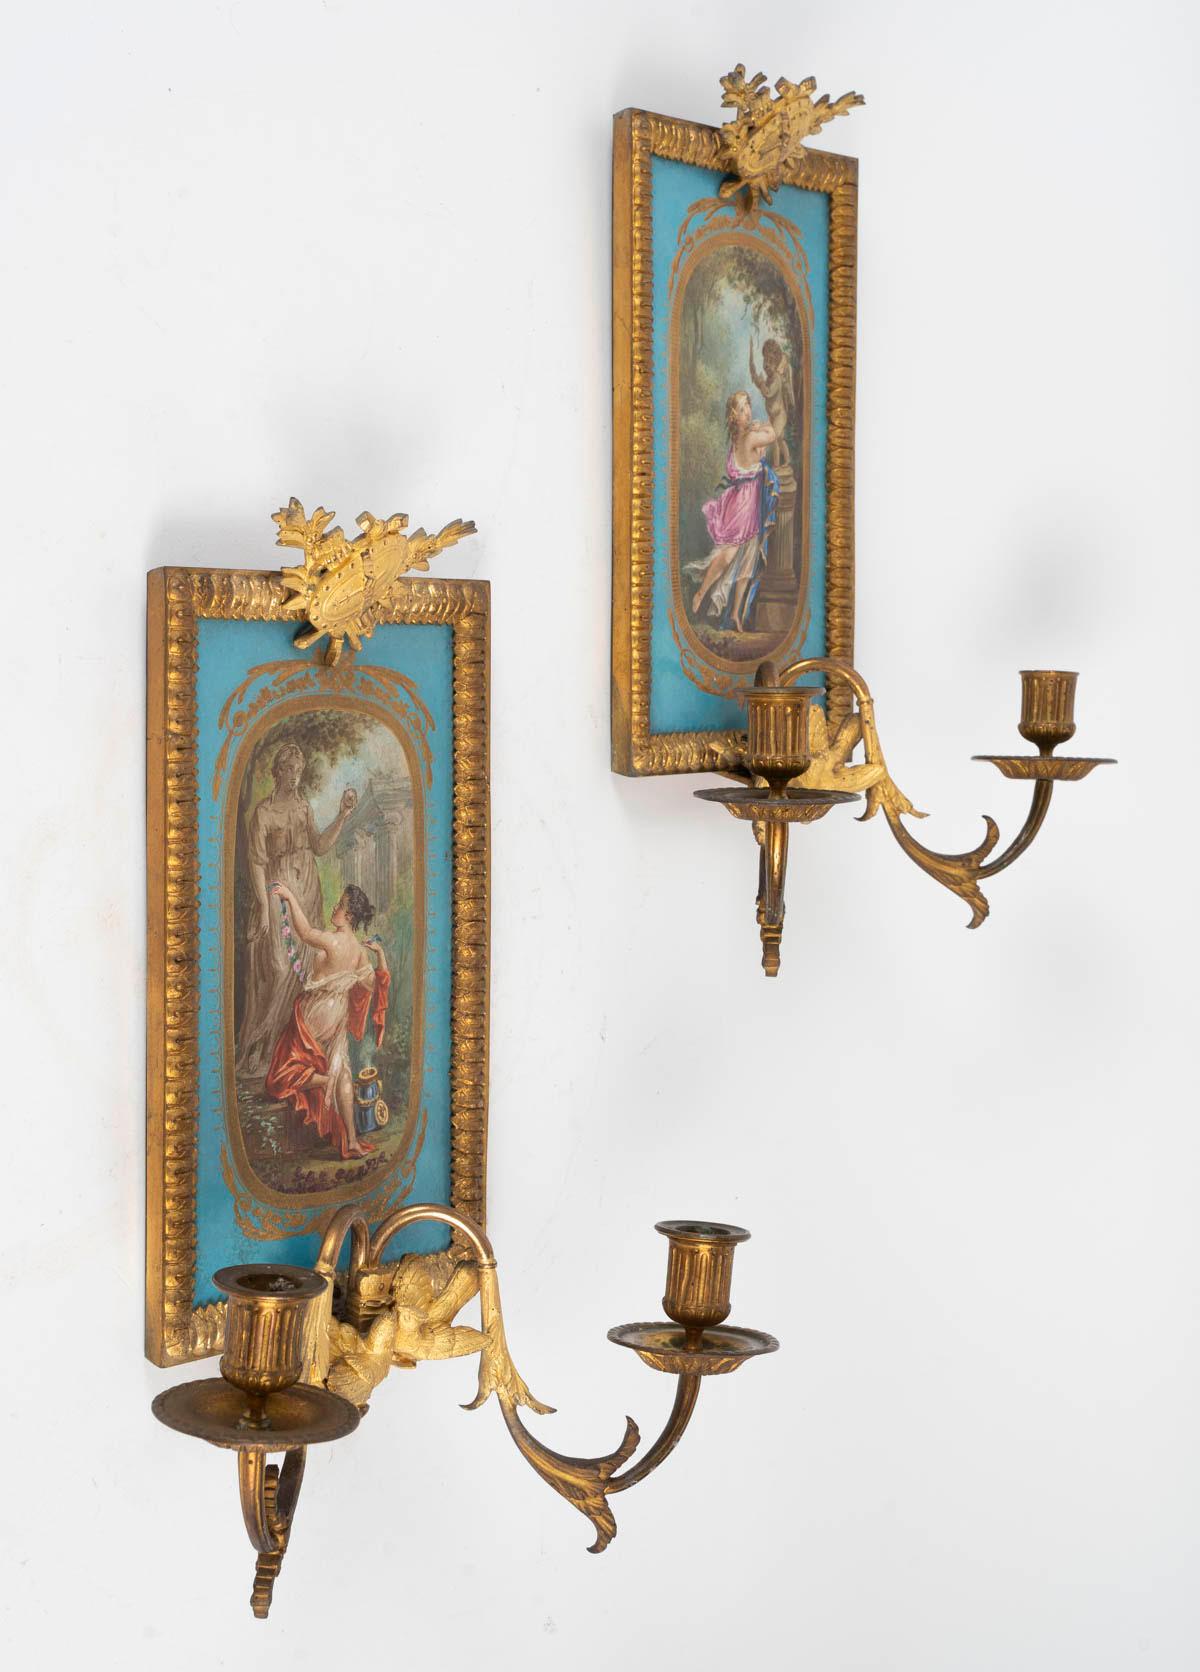 19th Century Pair of Wall Sconces in Gilt Bronze and Sèvres Porcelain, Napoleon Period.